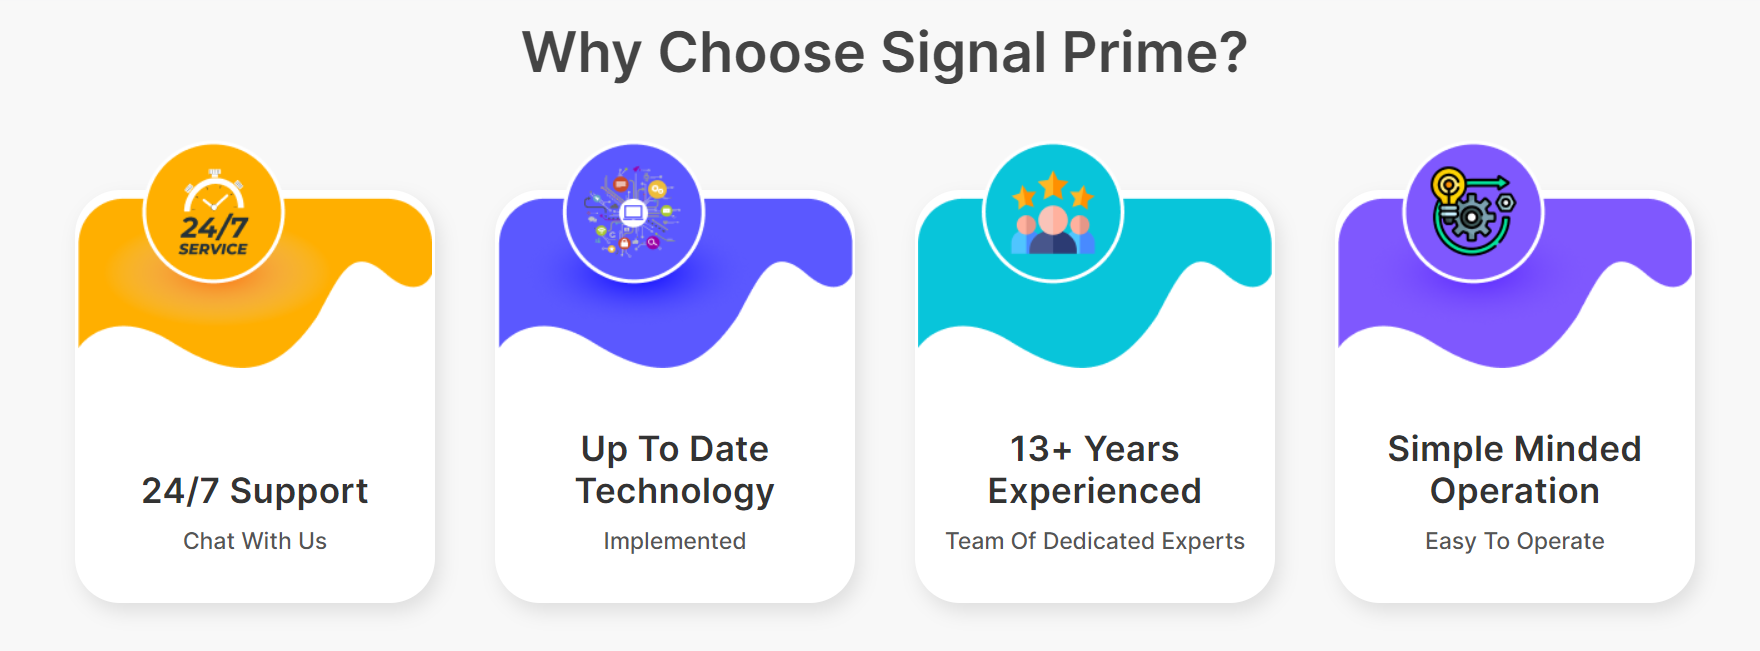 why choose signal prime?